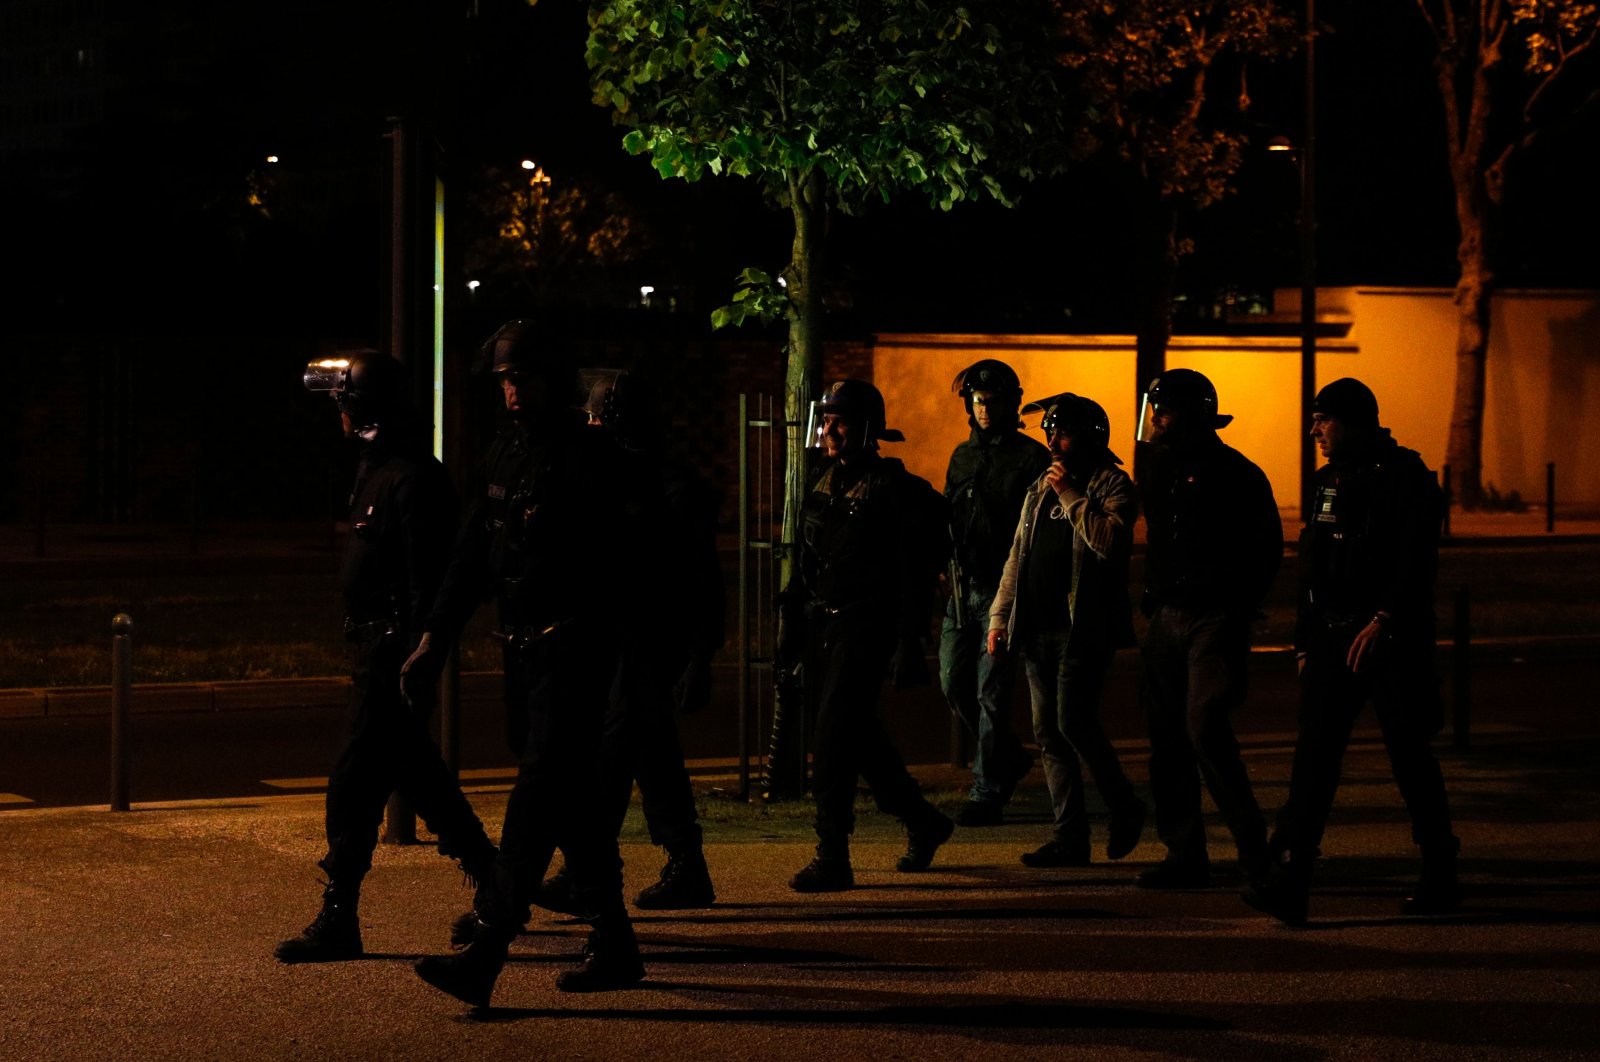 Plainclothes police and CRS anti-riot police officers walk in Villeneuve-la-Garenne, in the northern suburbs of Paris, early on April 20, 2020. (AFP Photo)